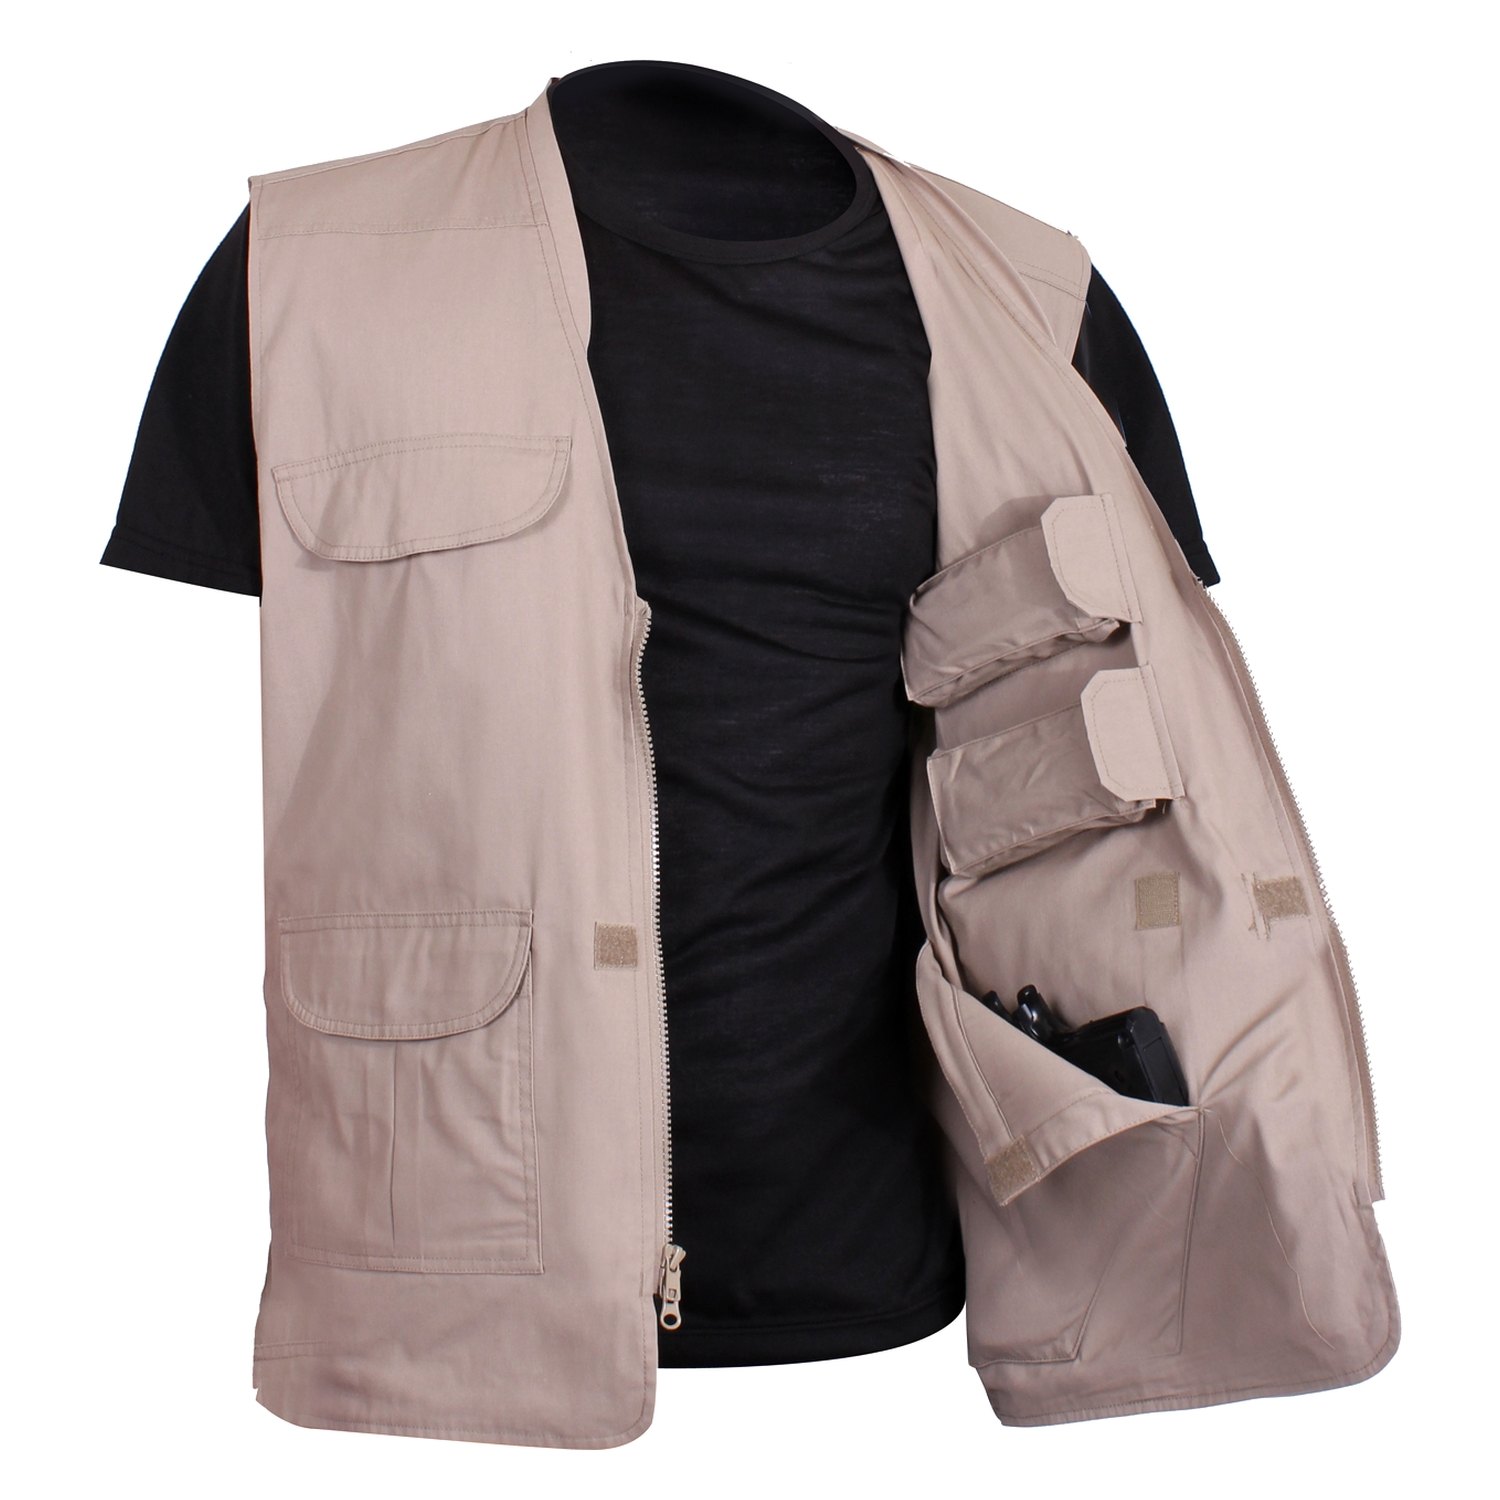 Rothco® - Lightweight Professional Concealed Carry Vest - RECREATIONiD.com